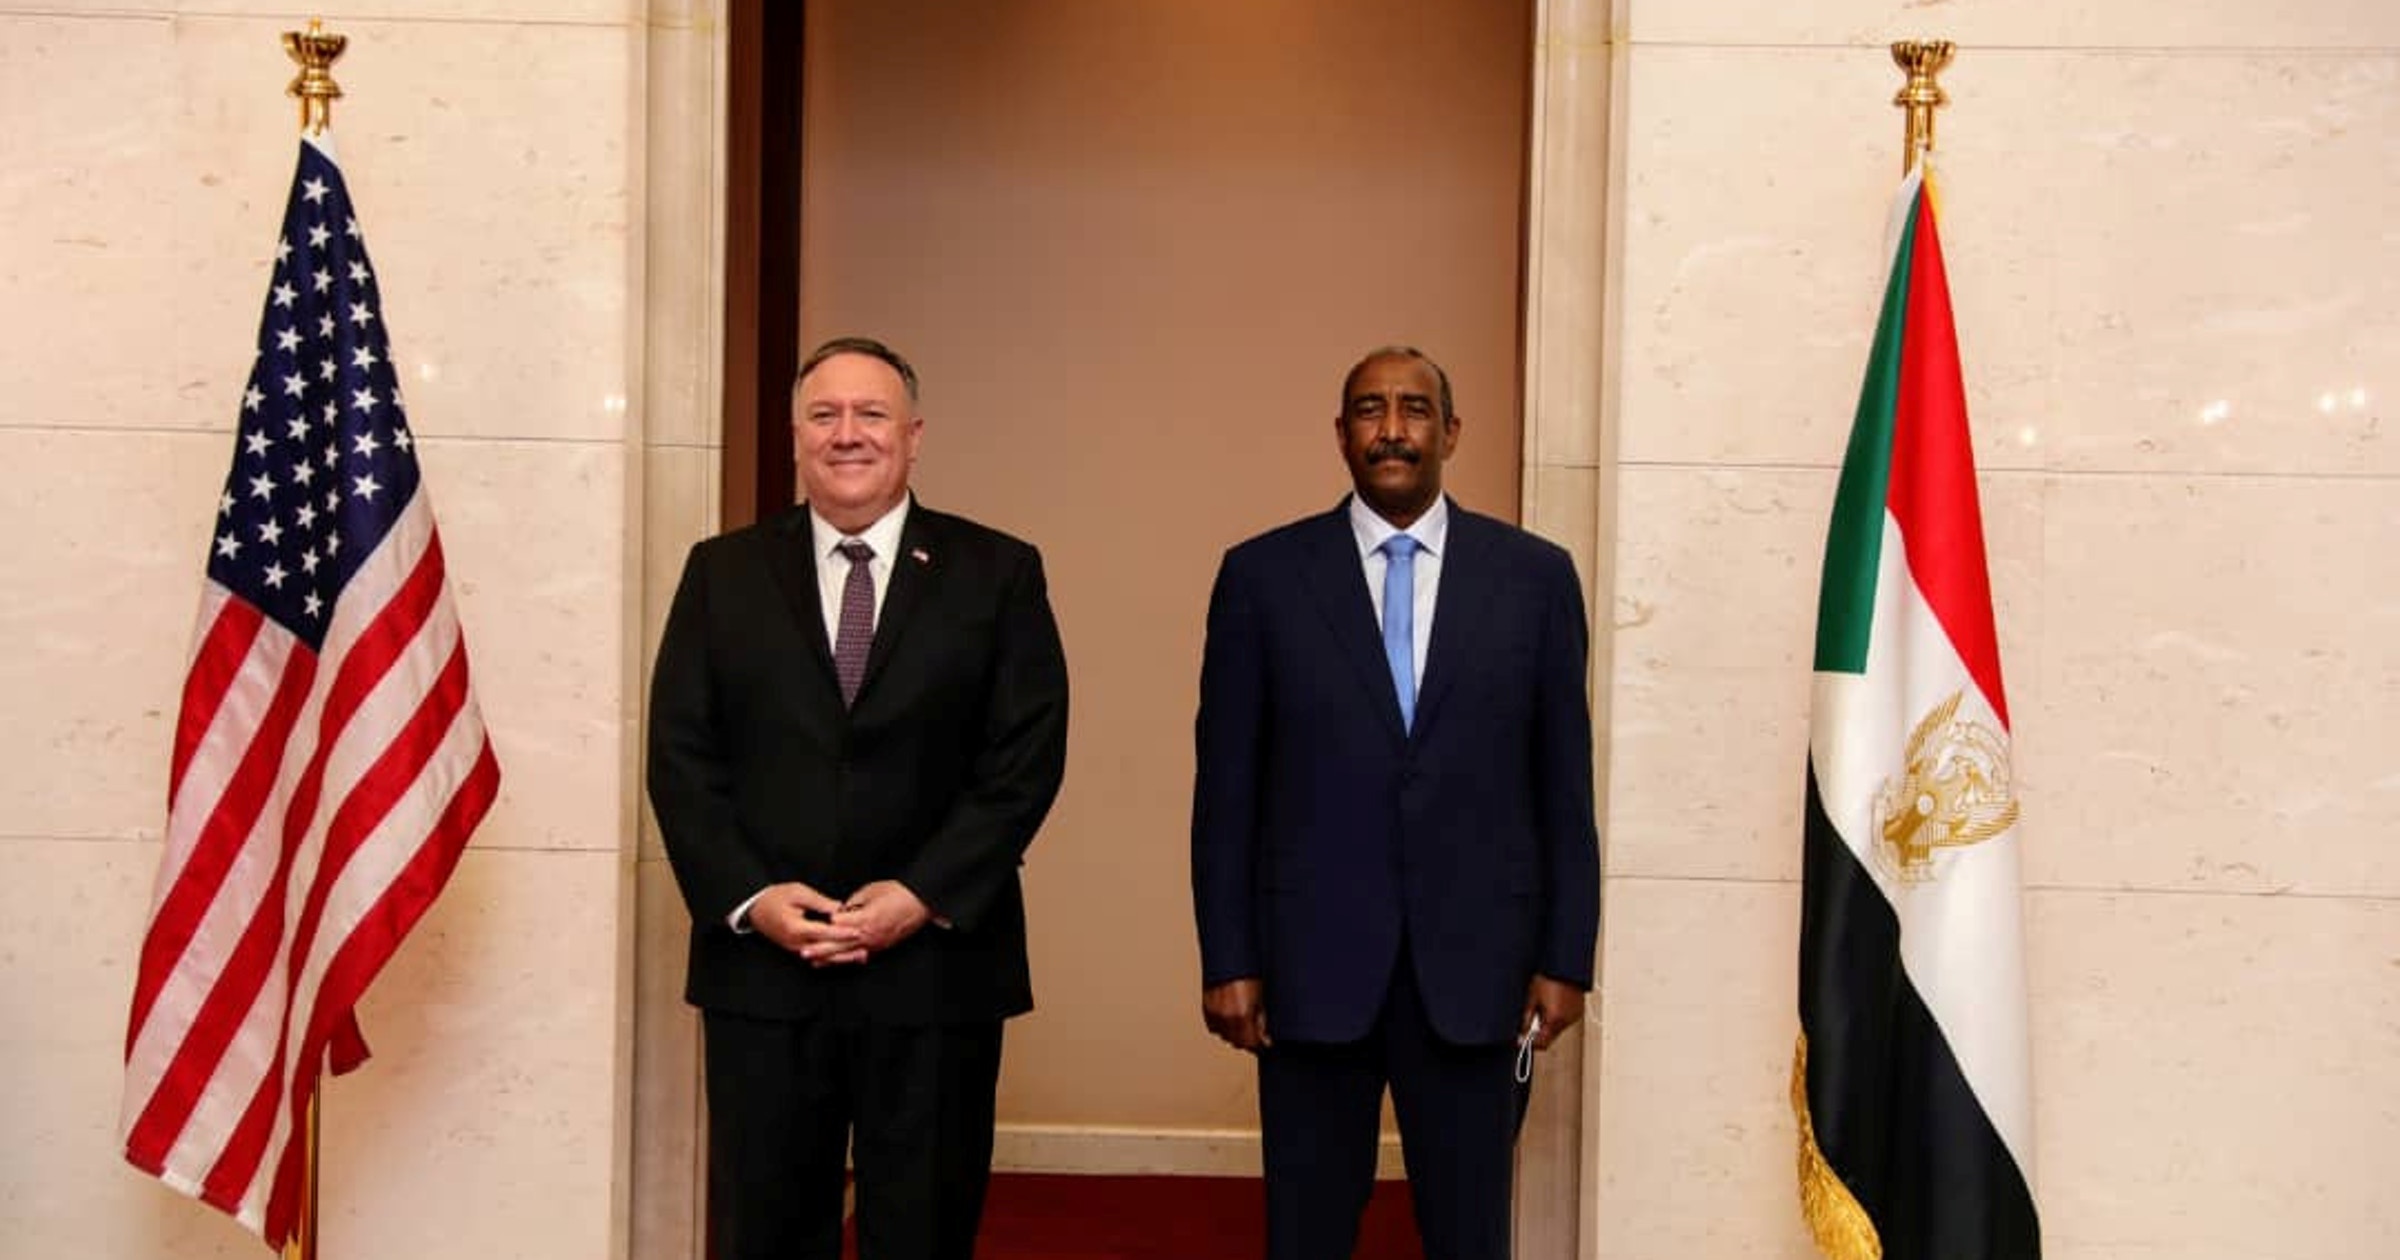 US Secretary of State Mike Pompeo, left, with Abdel-Fattah Burhan, head of Sudan's ruling sovereign council, in Khartoum in this August 25, 2020 